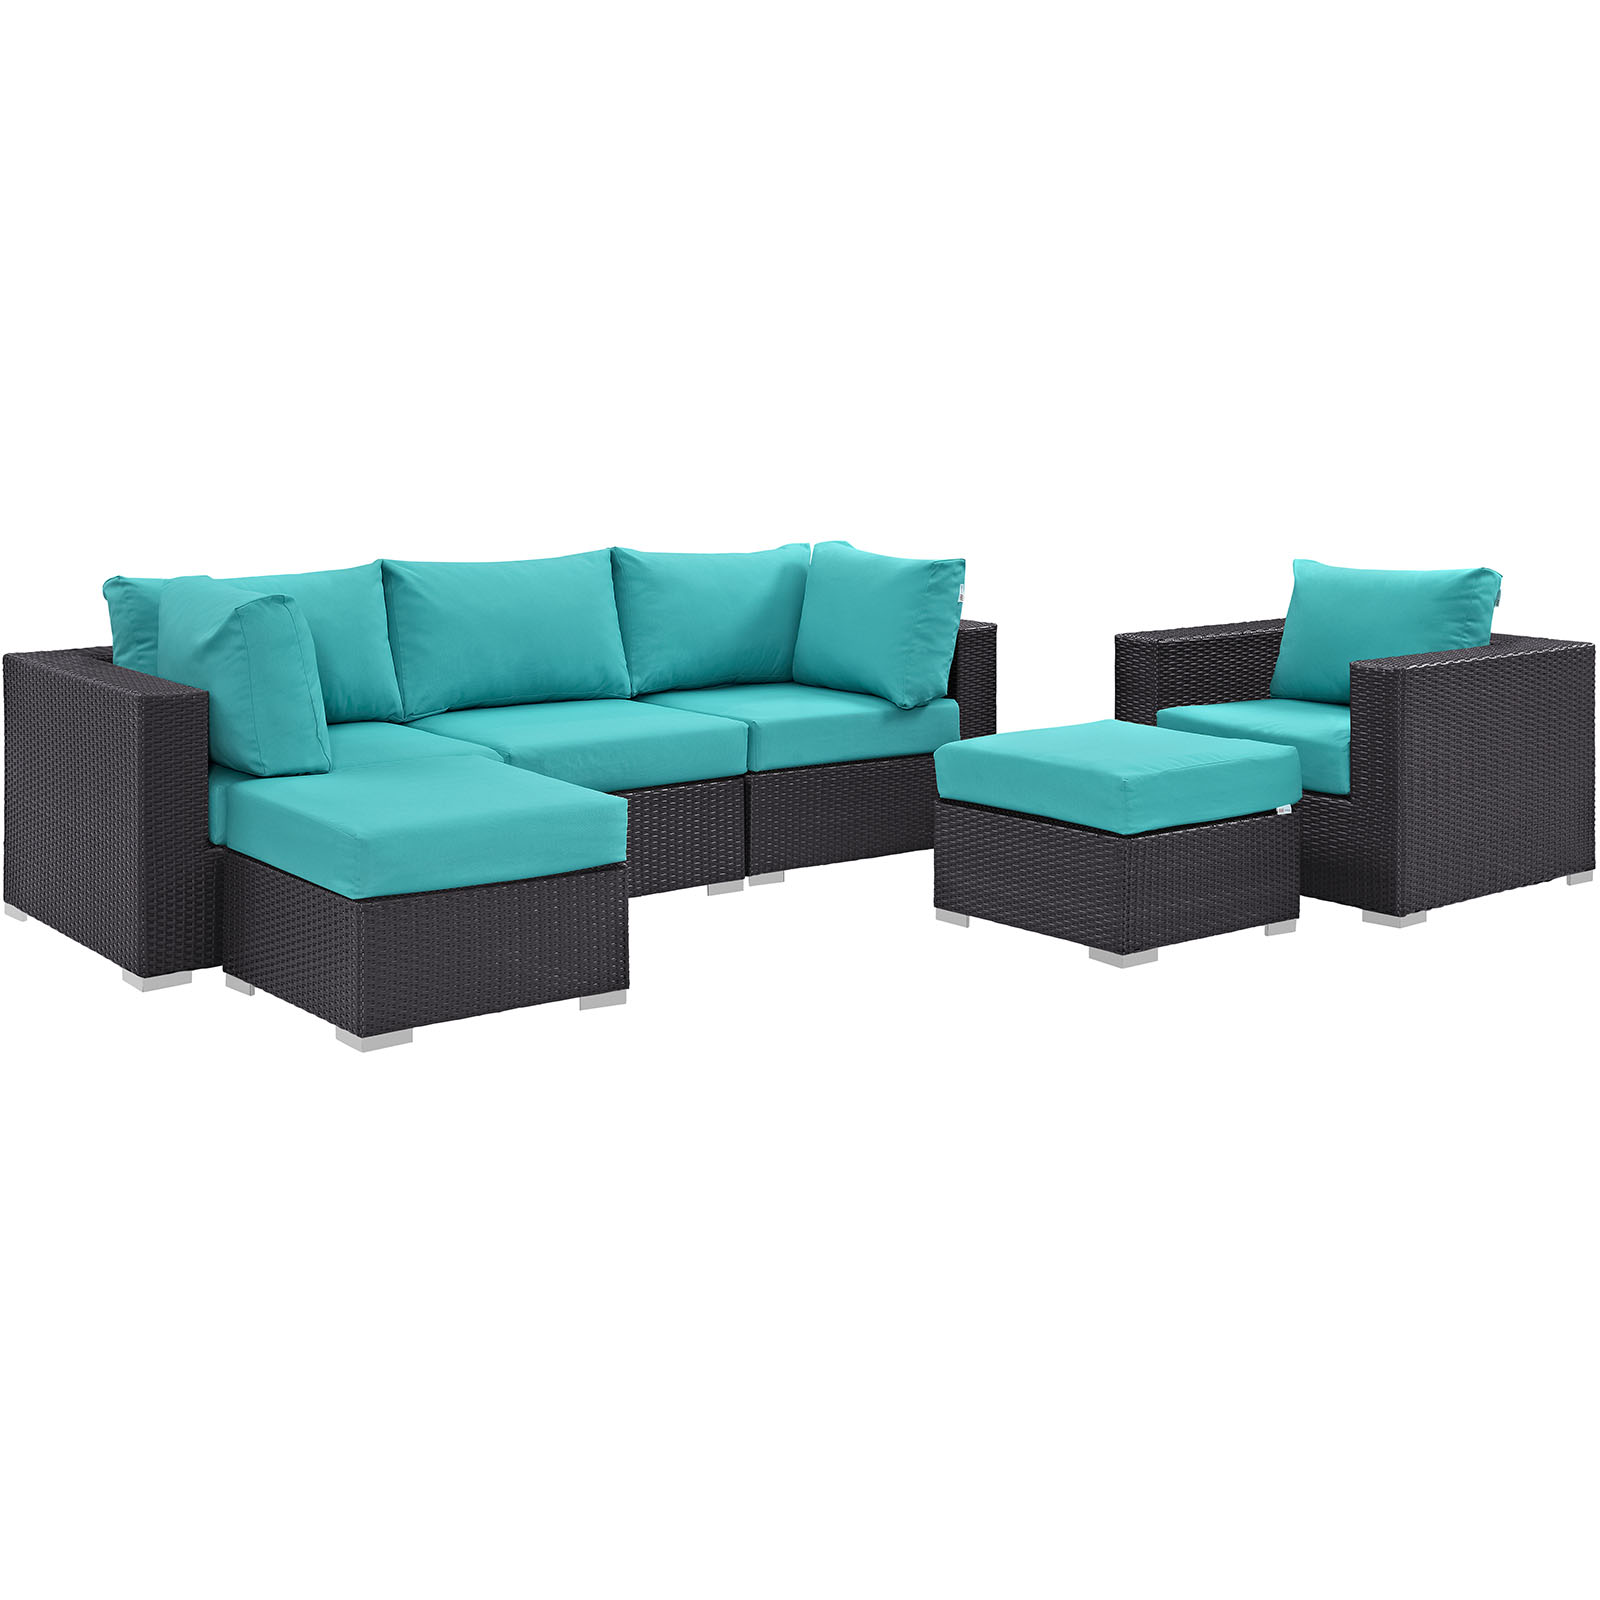 Modway Convene 6 Piece Outdoor Patio Sectional Set in Espresso Turquoise - image 2 of 8